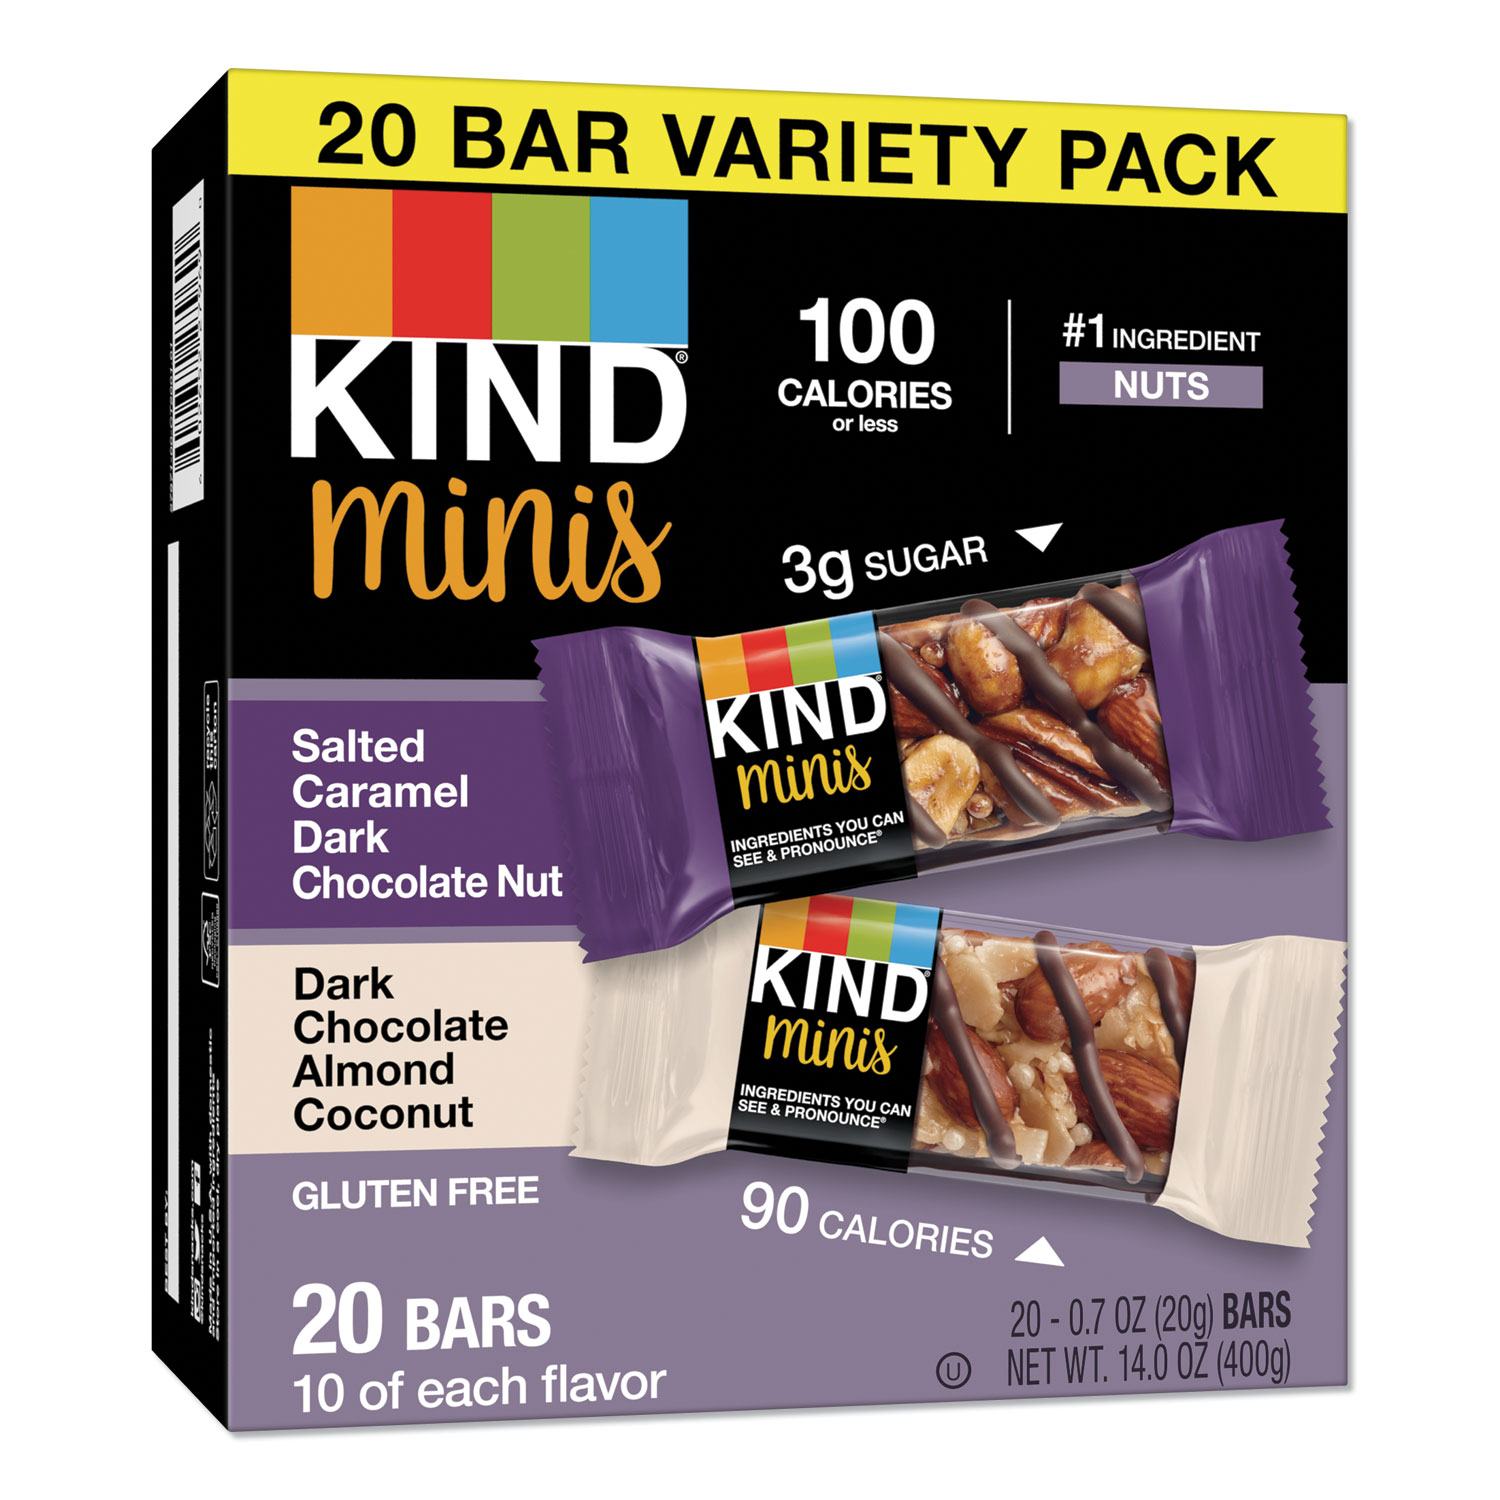  KIND 27970 Minis, Salted Caramel and Dark Chocolate Nut/Dark Chocolate Almond and Coconut, 0.7 oz, 20/Pack (KND27970) 